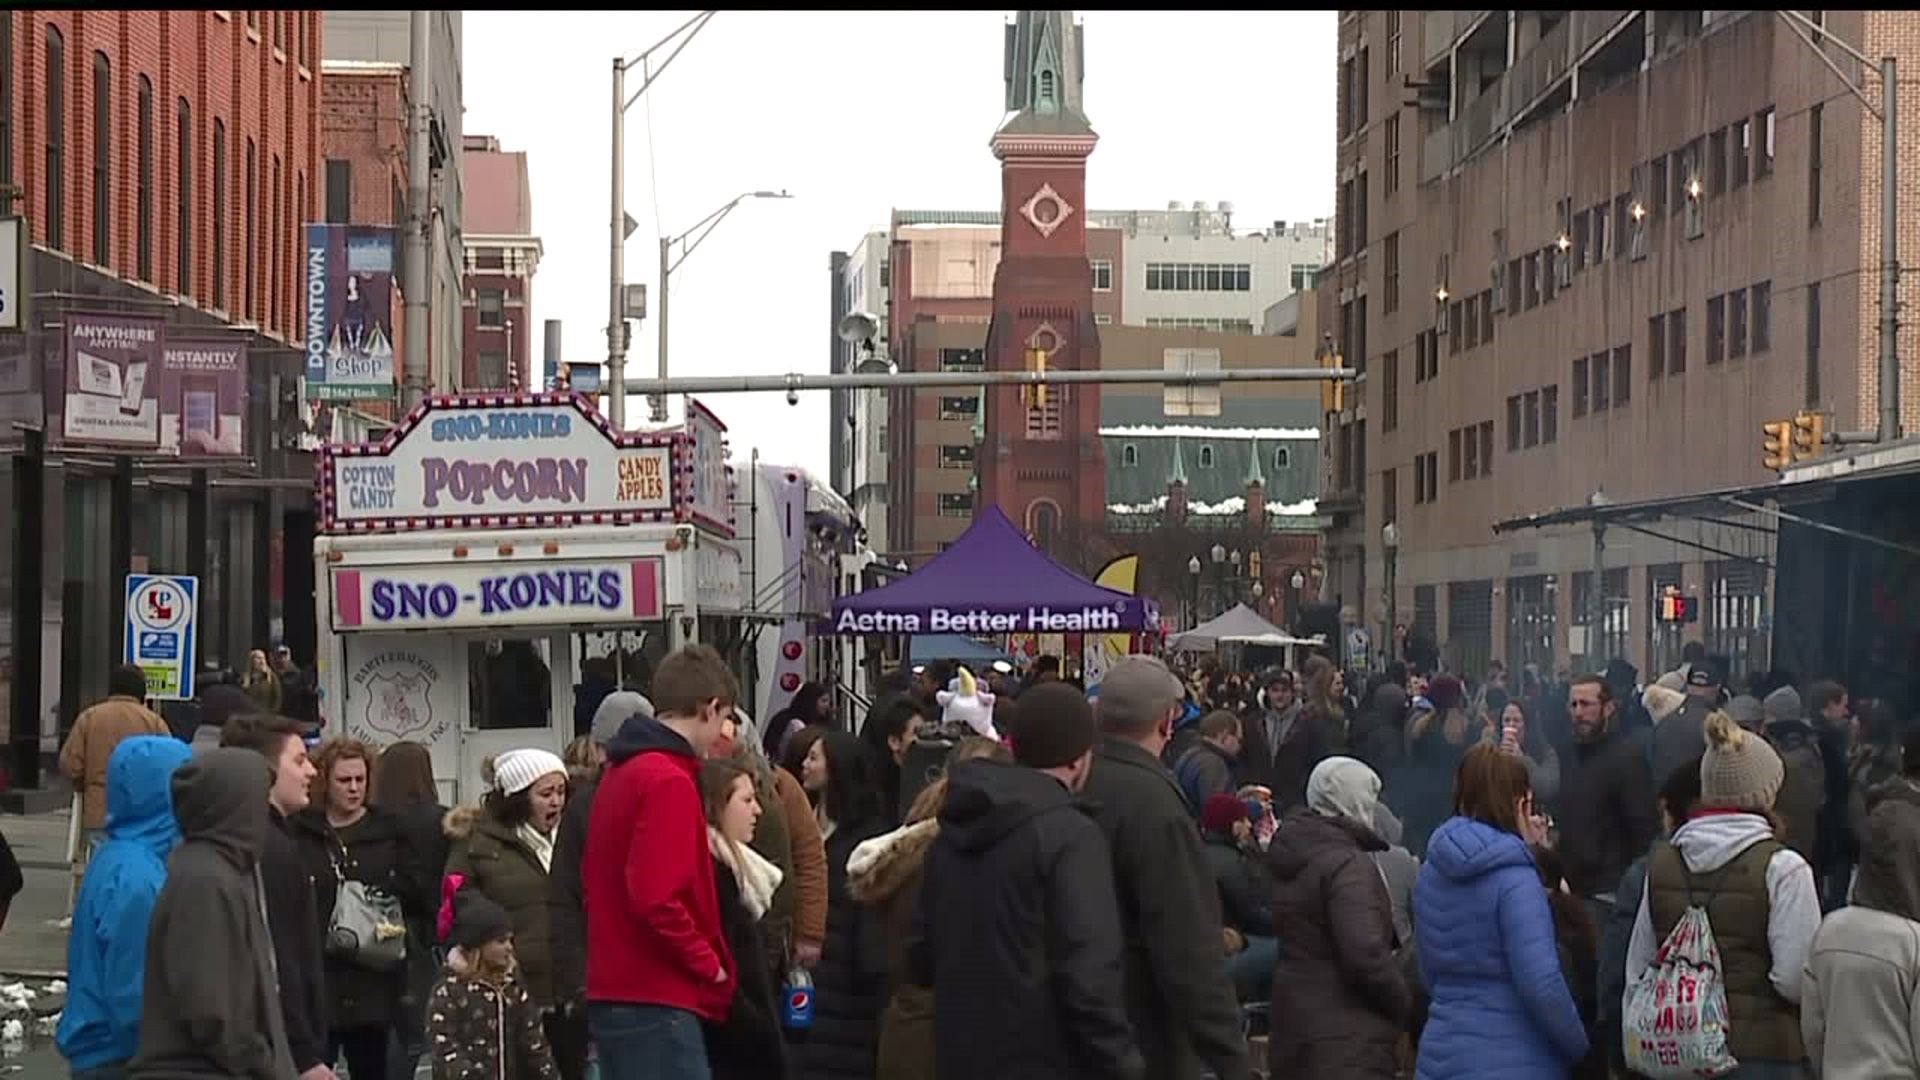 Second Annual Ice & Fire Festival held in Harrisburg